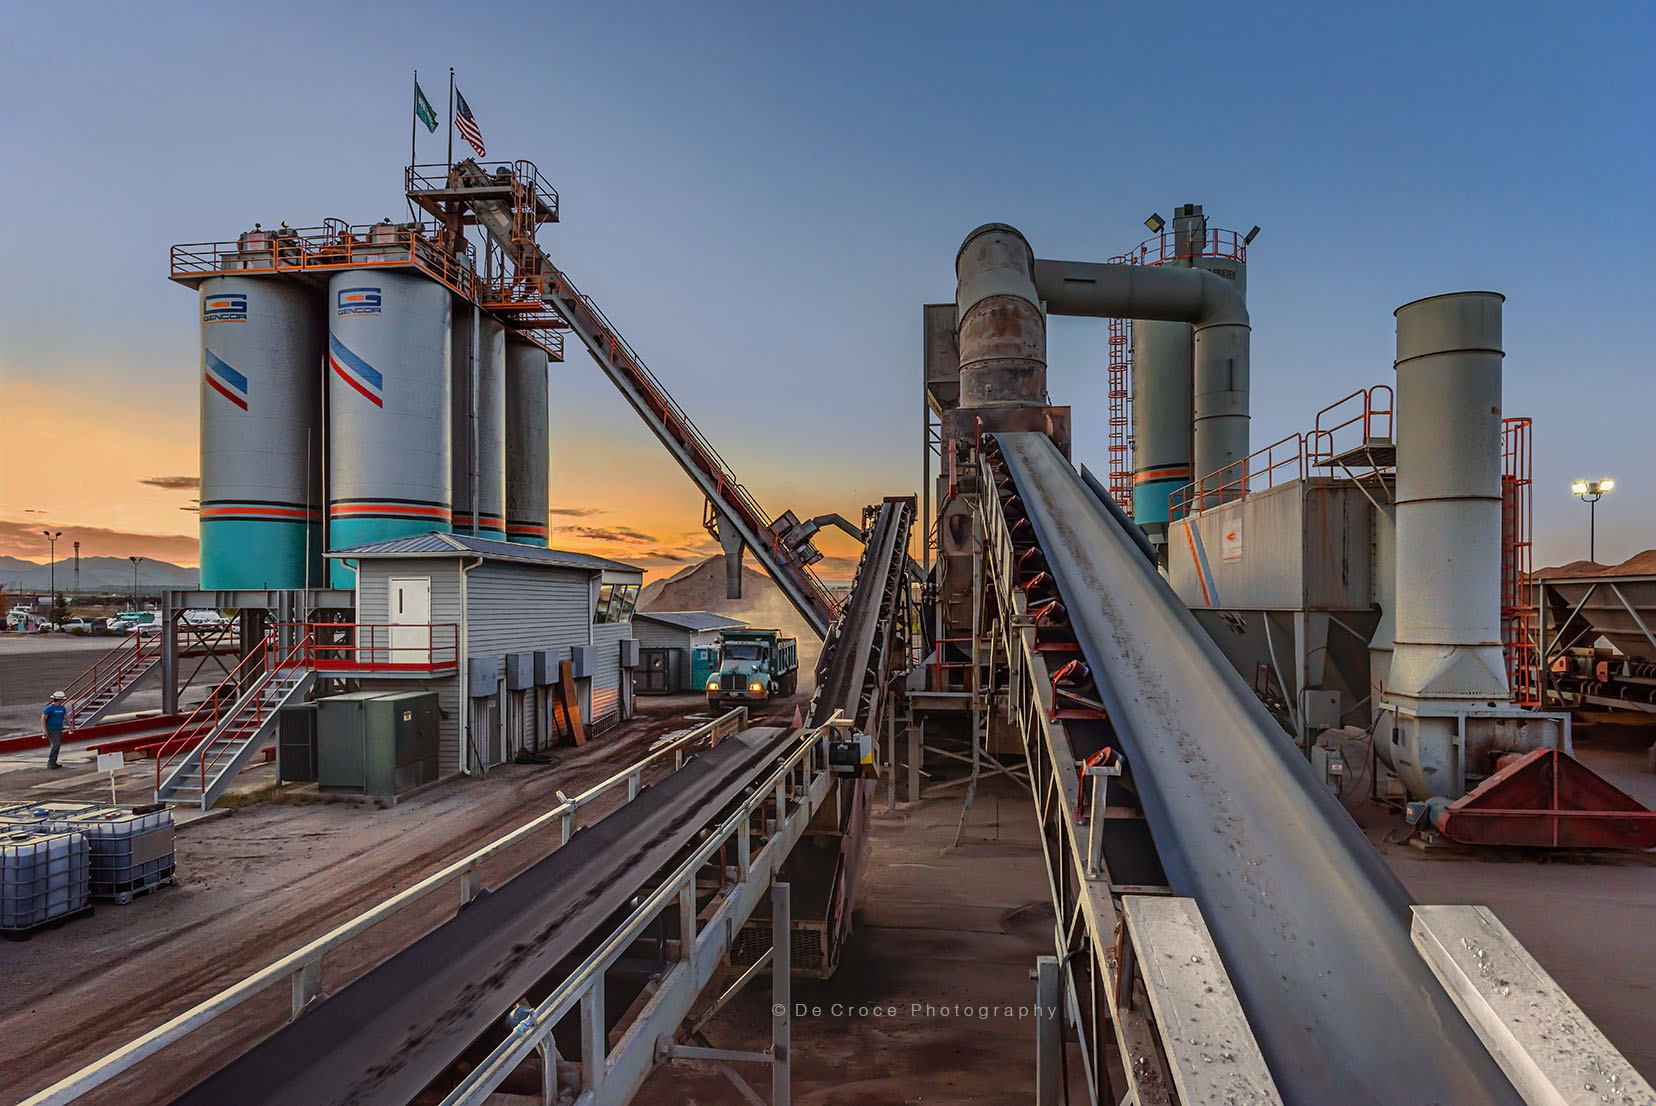 Photographer for industry created sunset image for calendar.